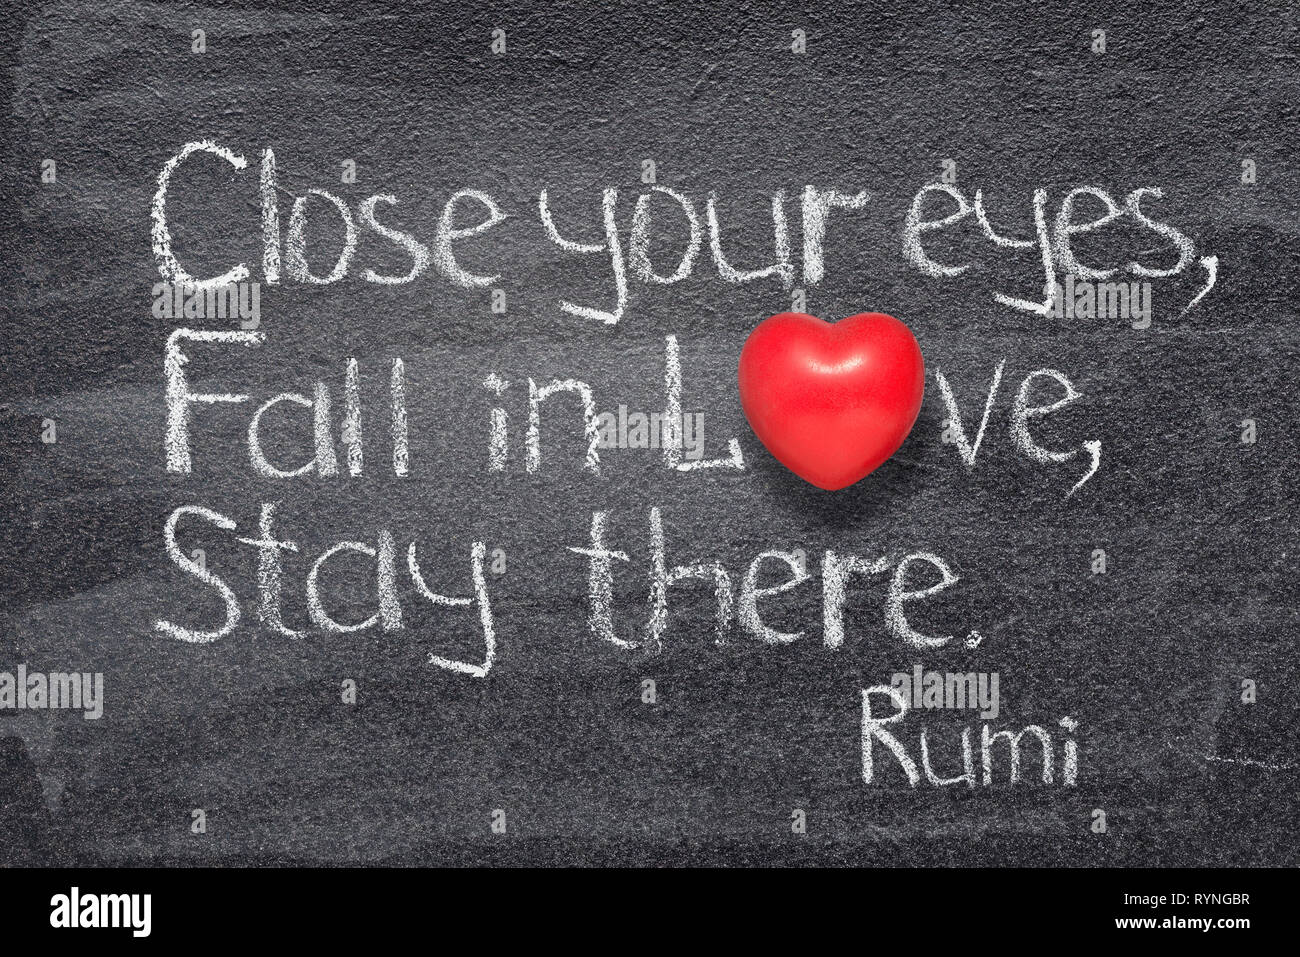 Close your eyes, fall in Love, stay there -  ancient Persian poet and philosopher Rumi quote written on chalkboard with red heart symbol instead of O Stock Photo